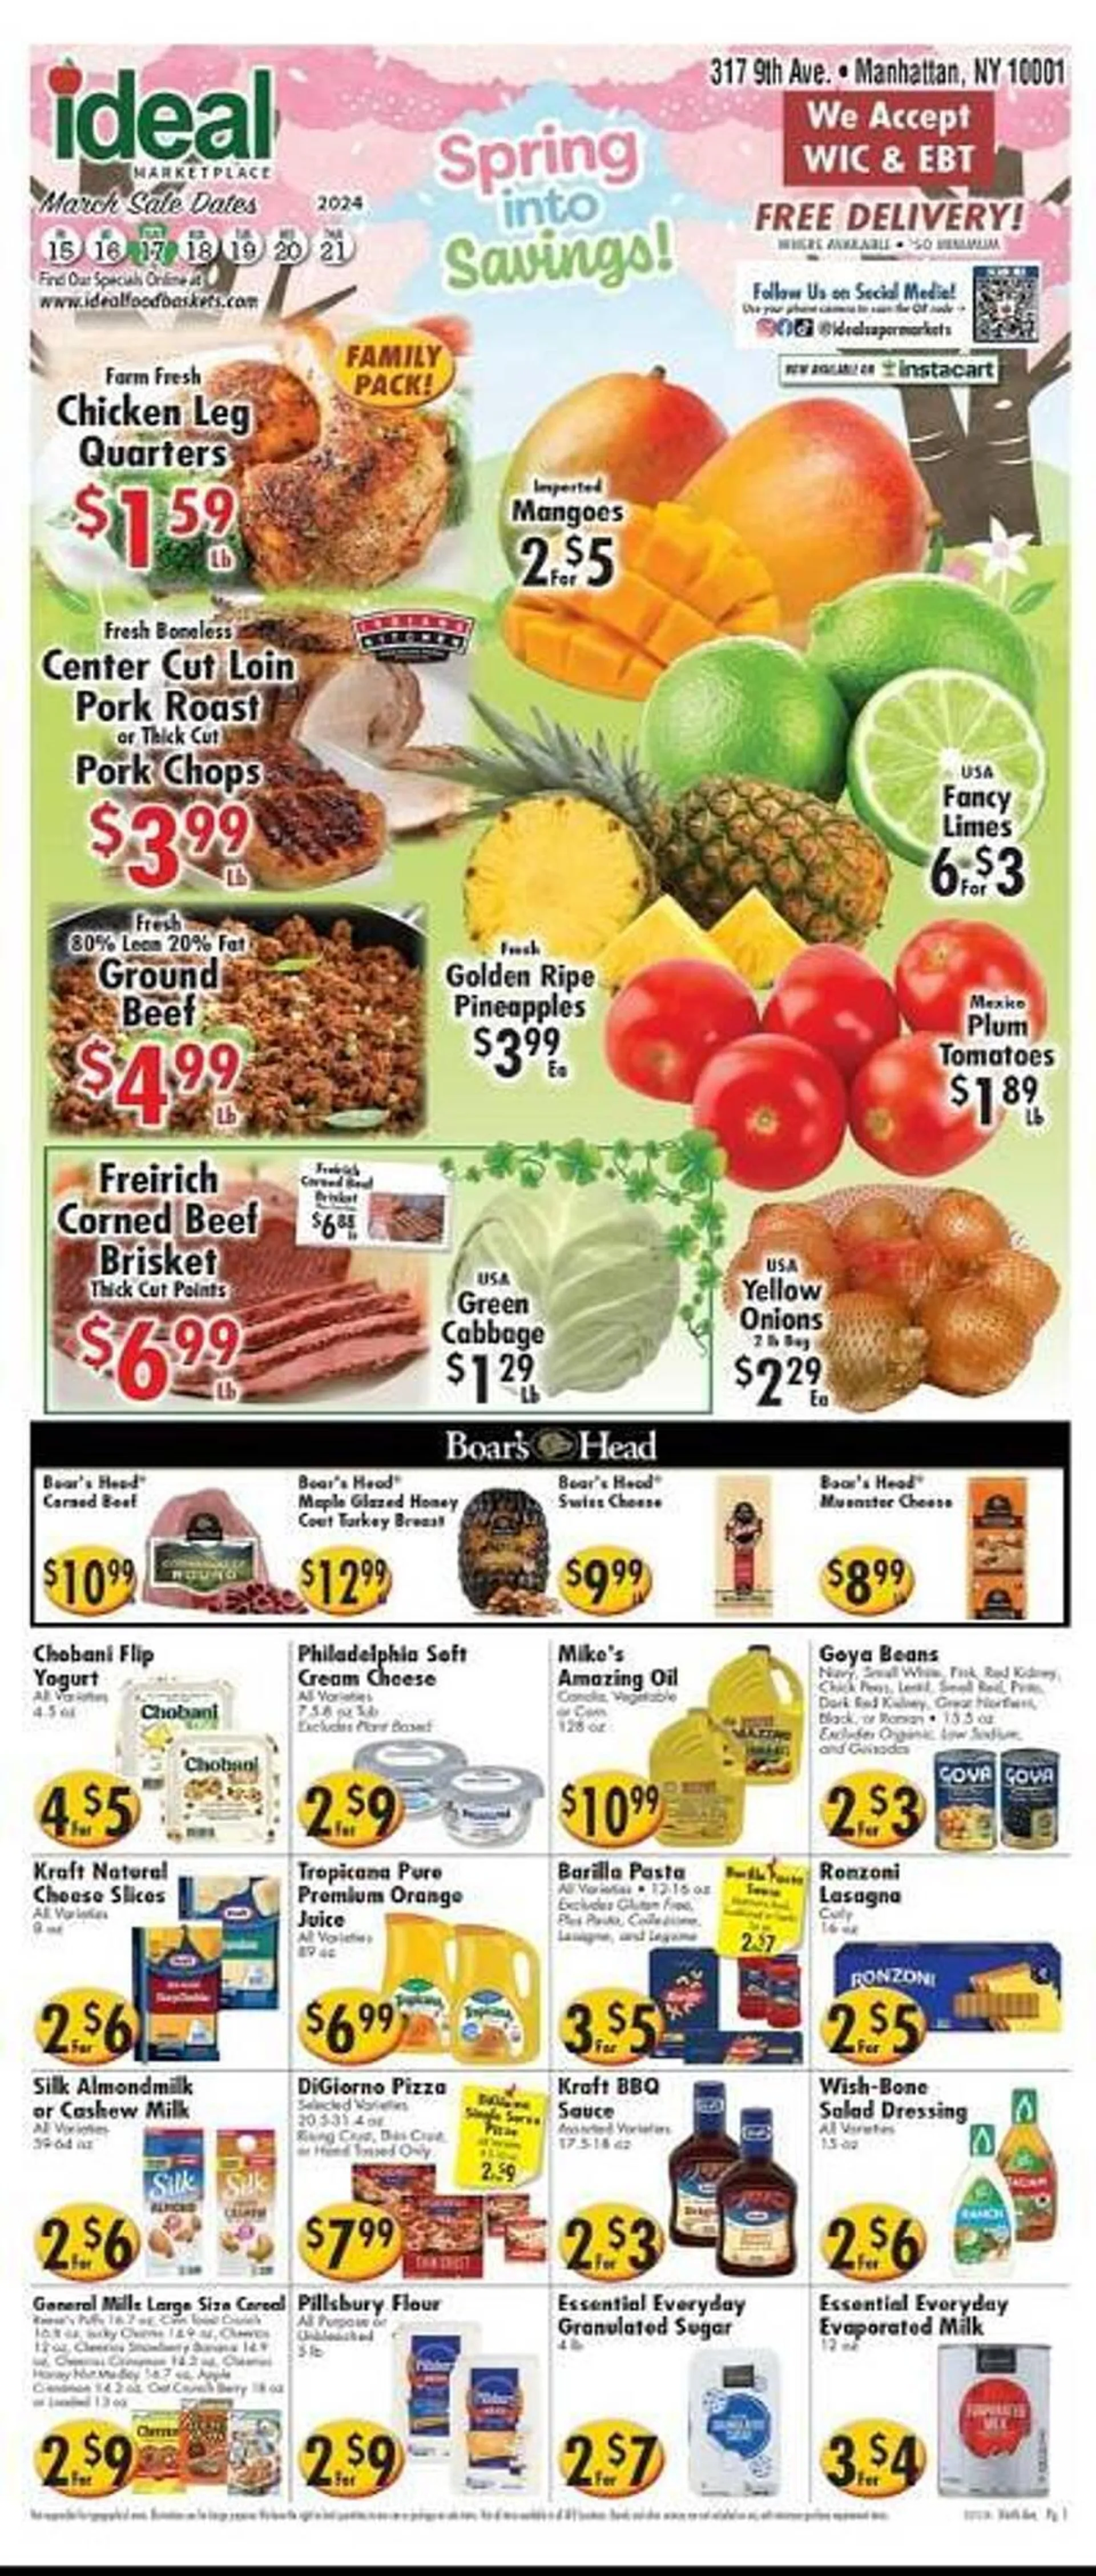 Weekly ad Ideal Food Basket Weekly Ad from March 15 to March 21 2024 - Page 